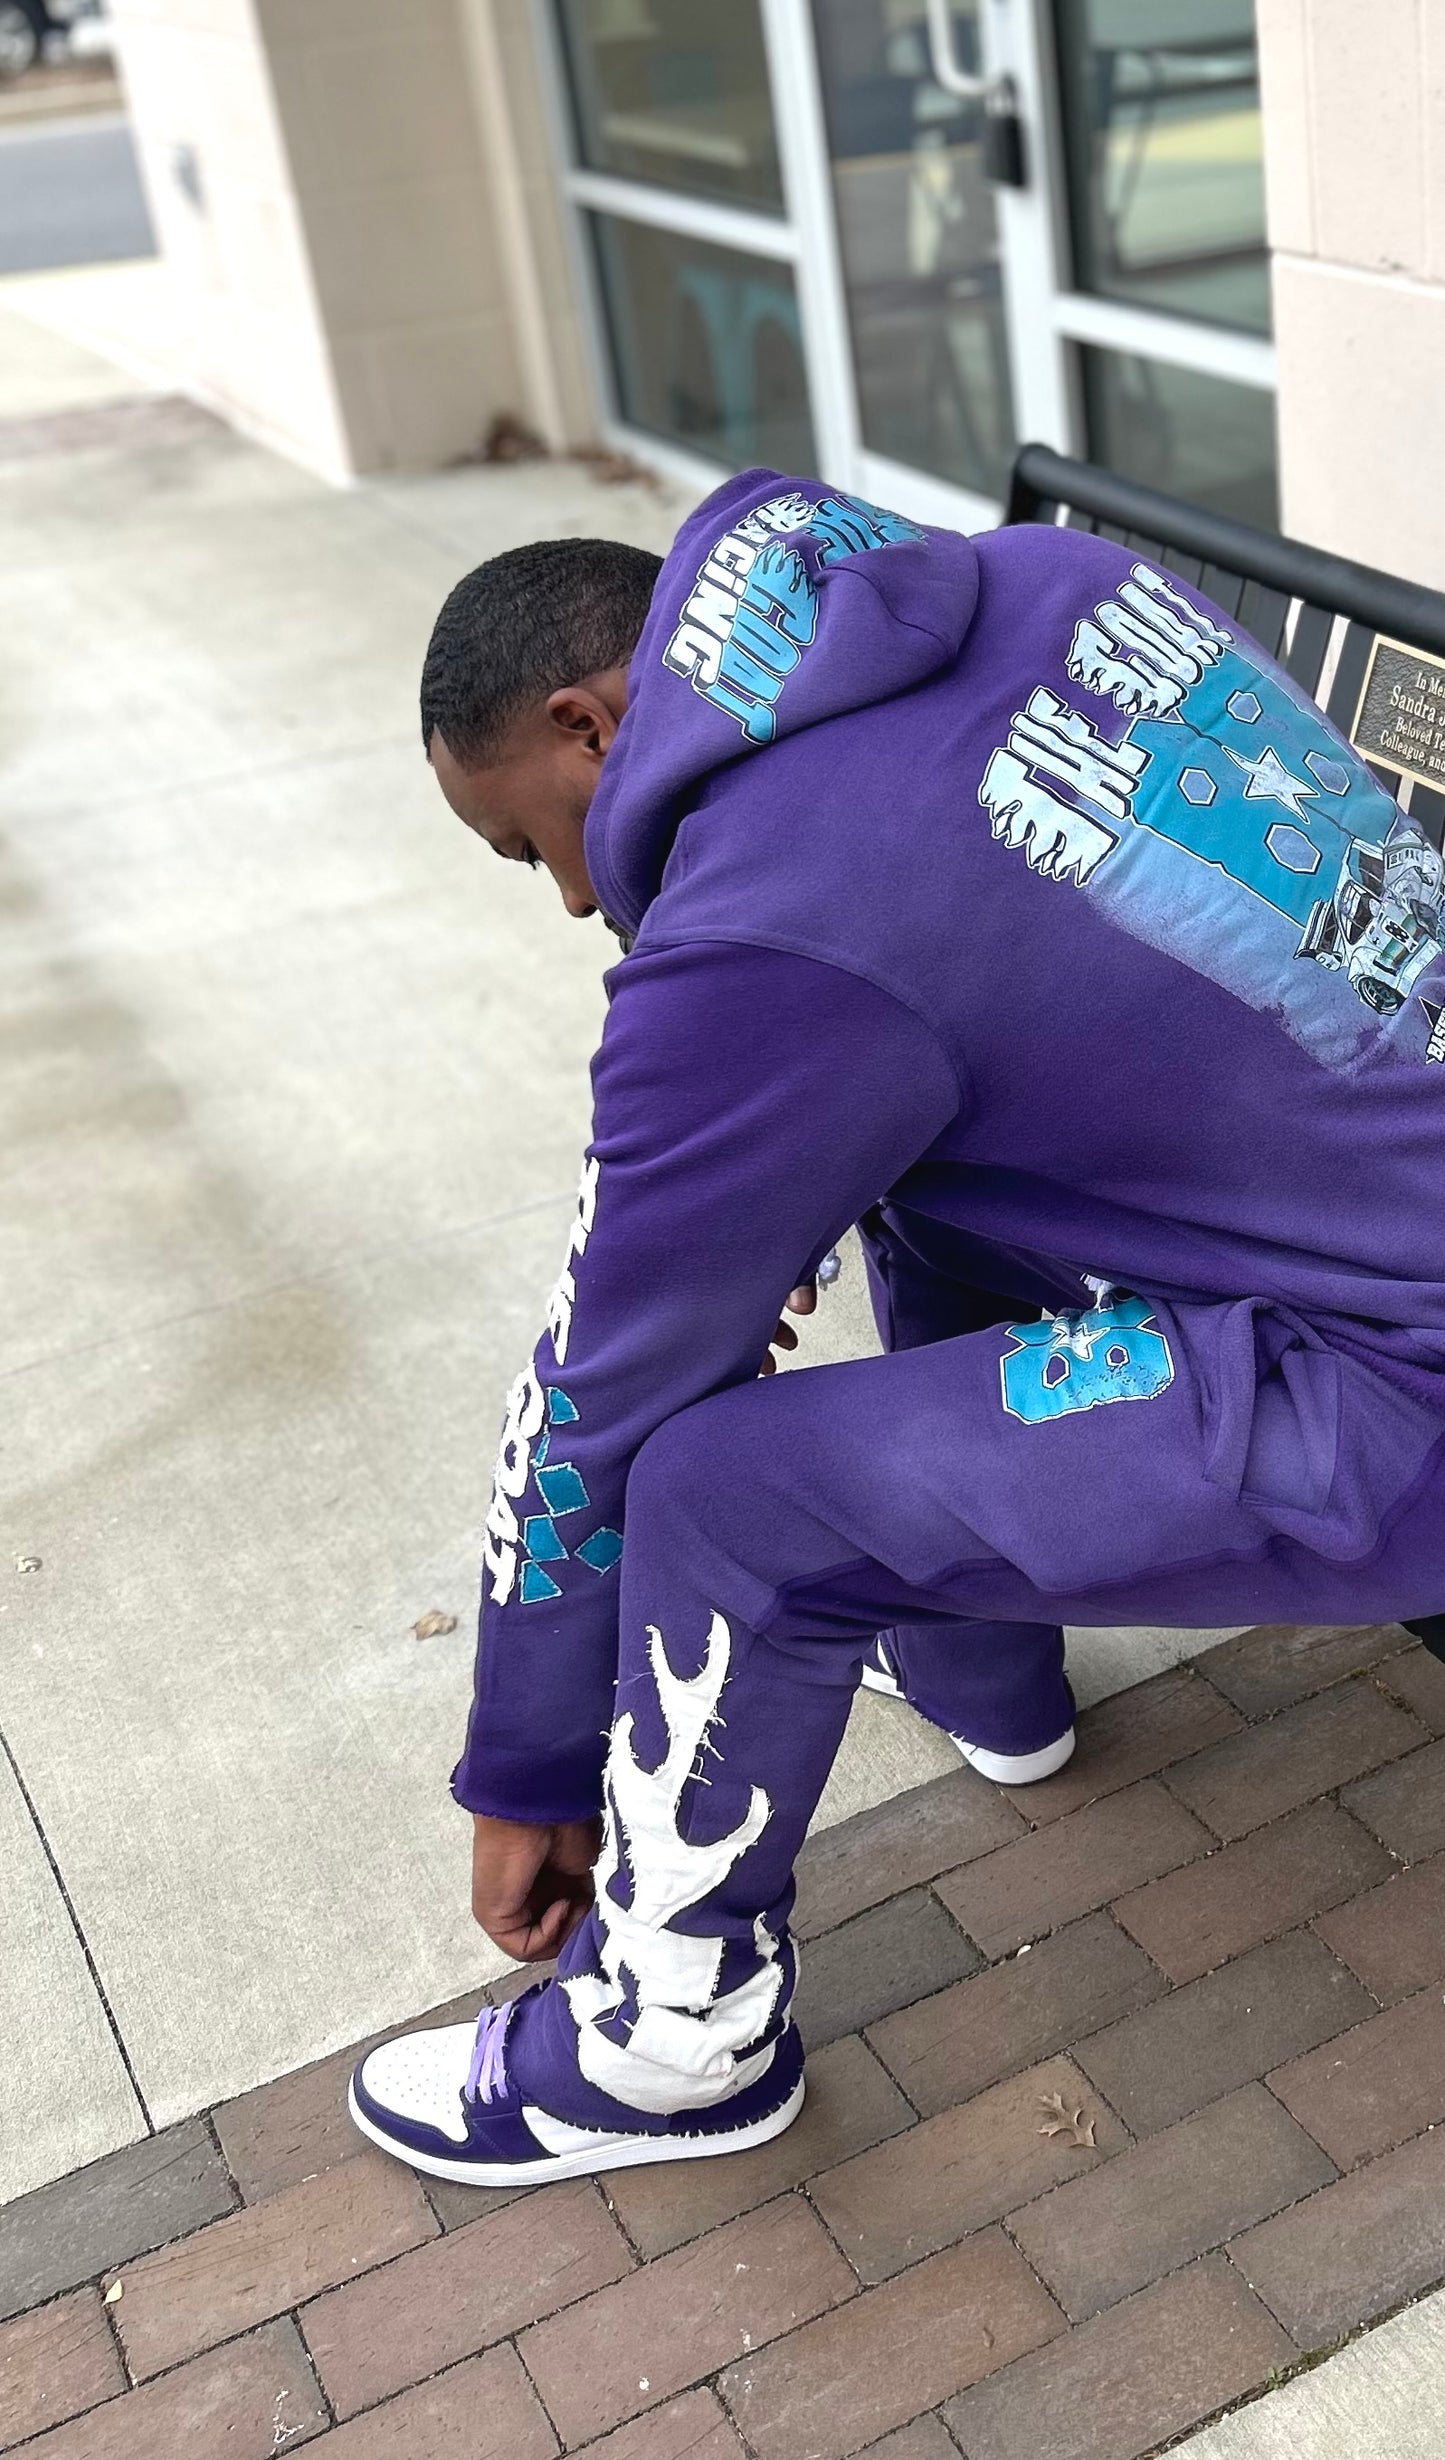 The G.O.A.T “RACING 2 THE MONEY” PURPLE/WHITE/TEAL Hoodie & Jogger set